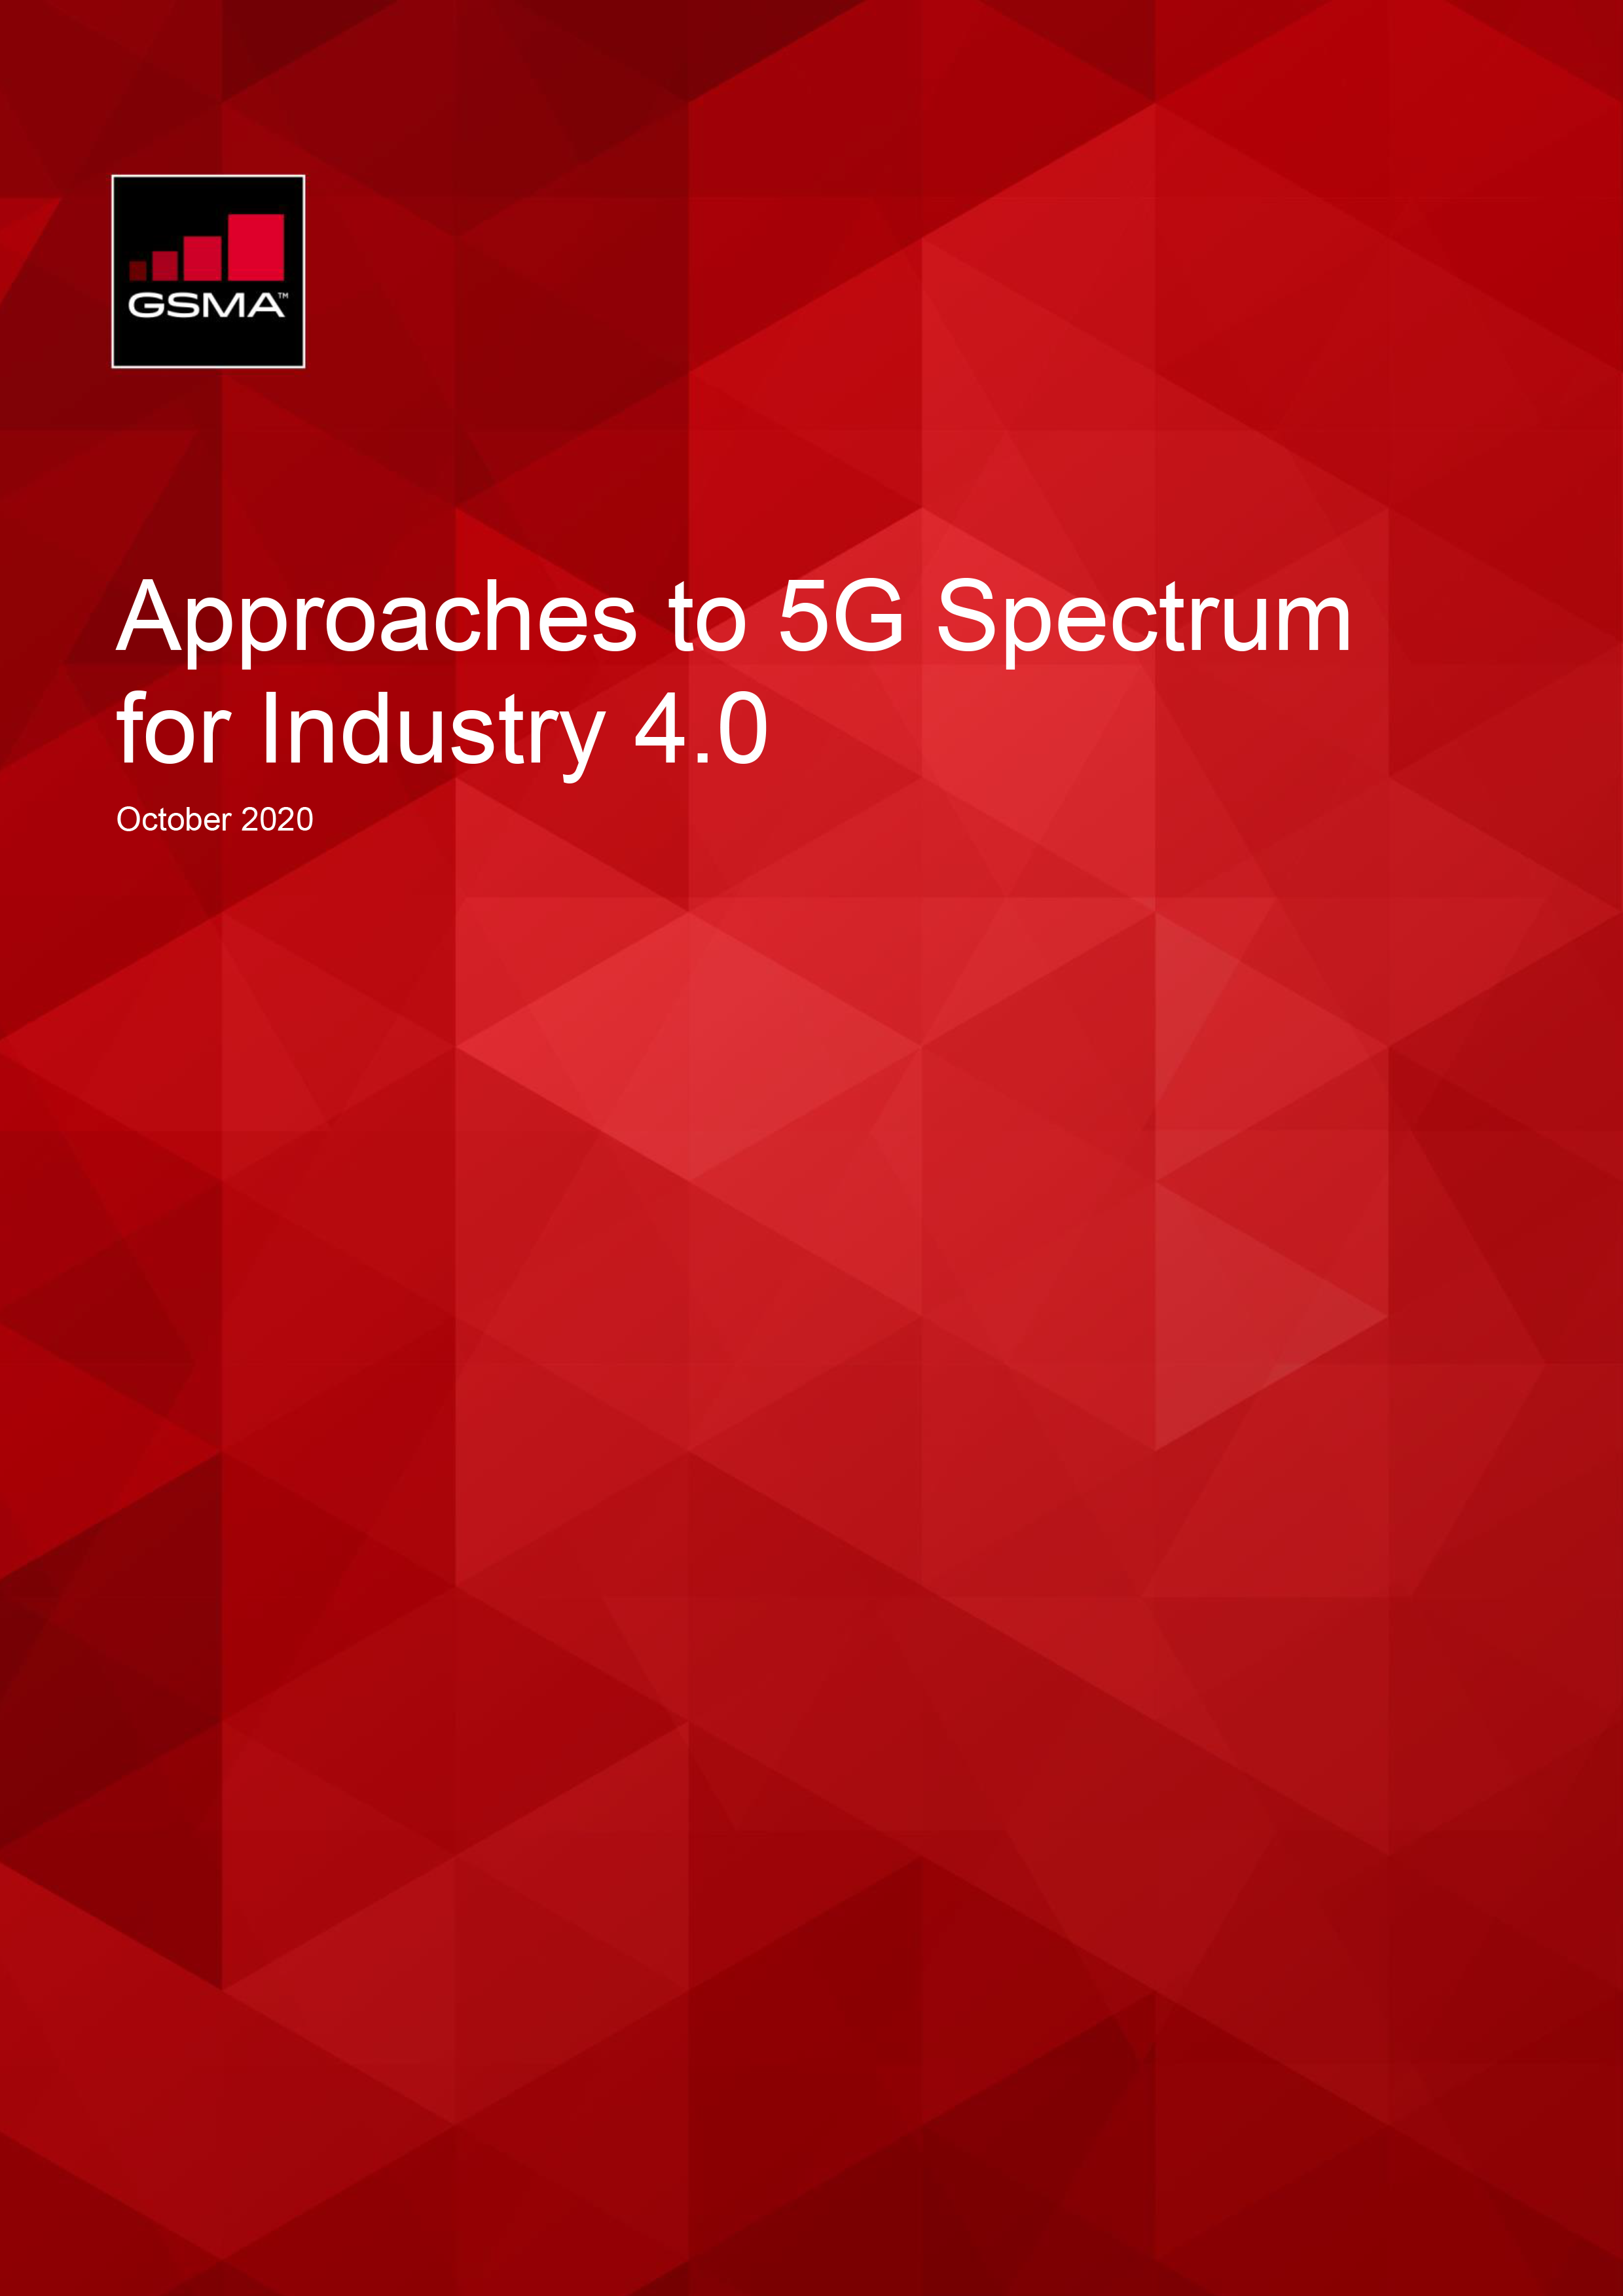 Approaches to 5G Spectrum for Industry 4.0 image